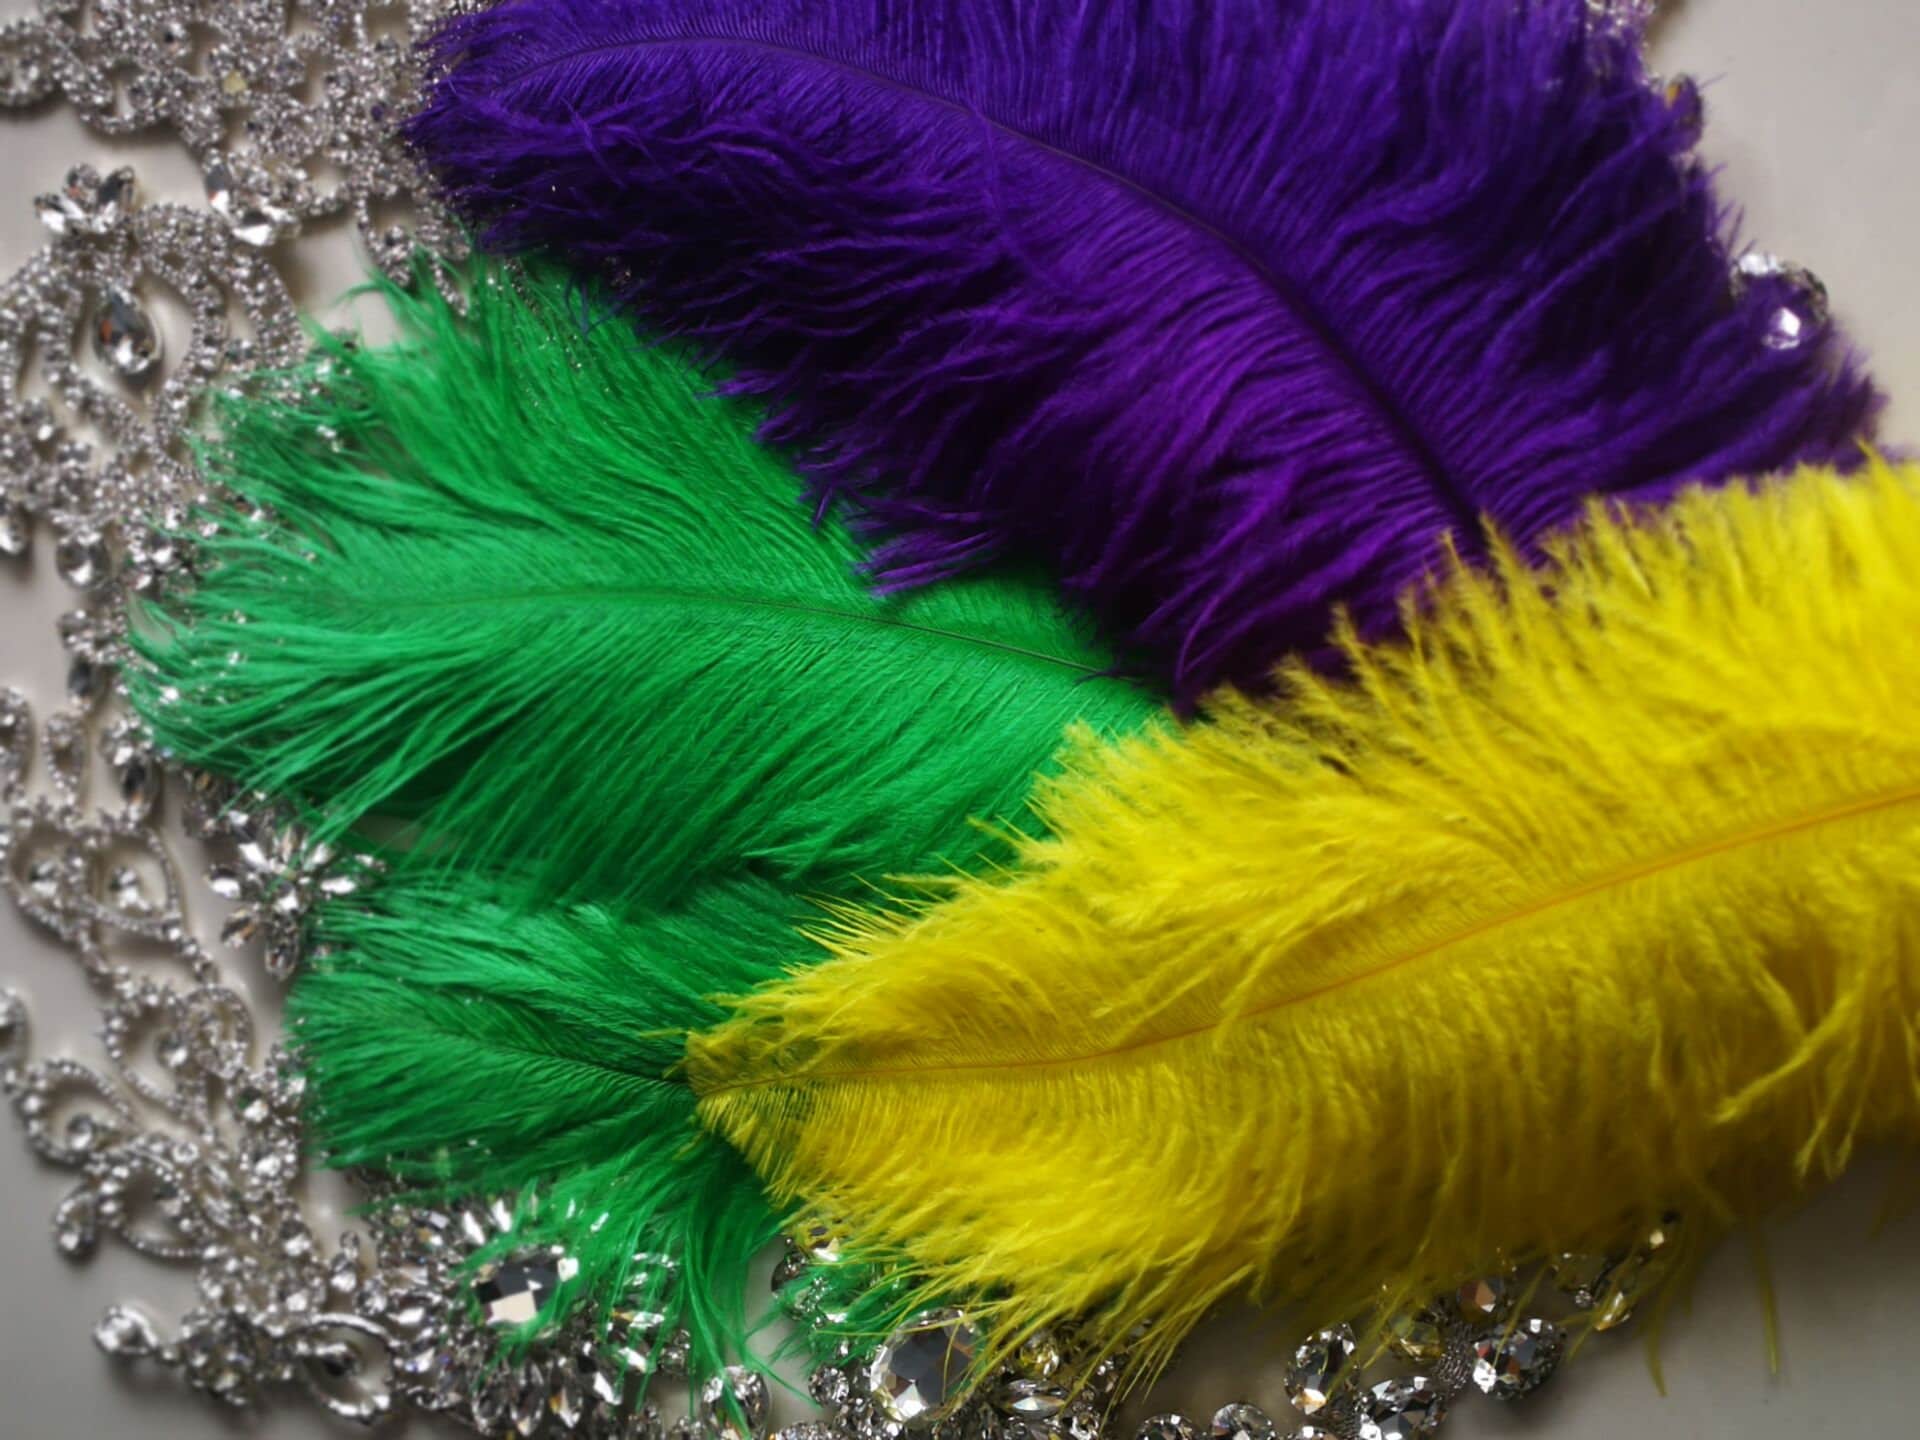 450 Pcs Mardi Gras Feathers Colorful Feathers for DIY Crafts Mardi Gras  Supplies Green Gold Purple Feathers Bulk Colorful Feathers Crafts for Mask